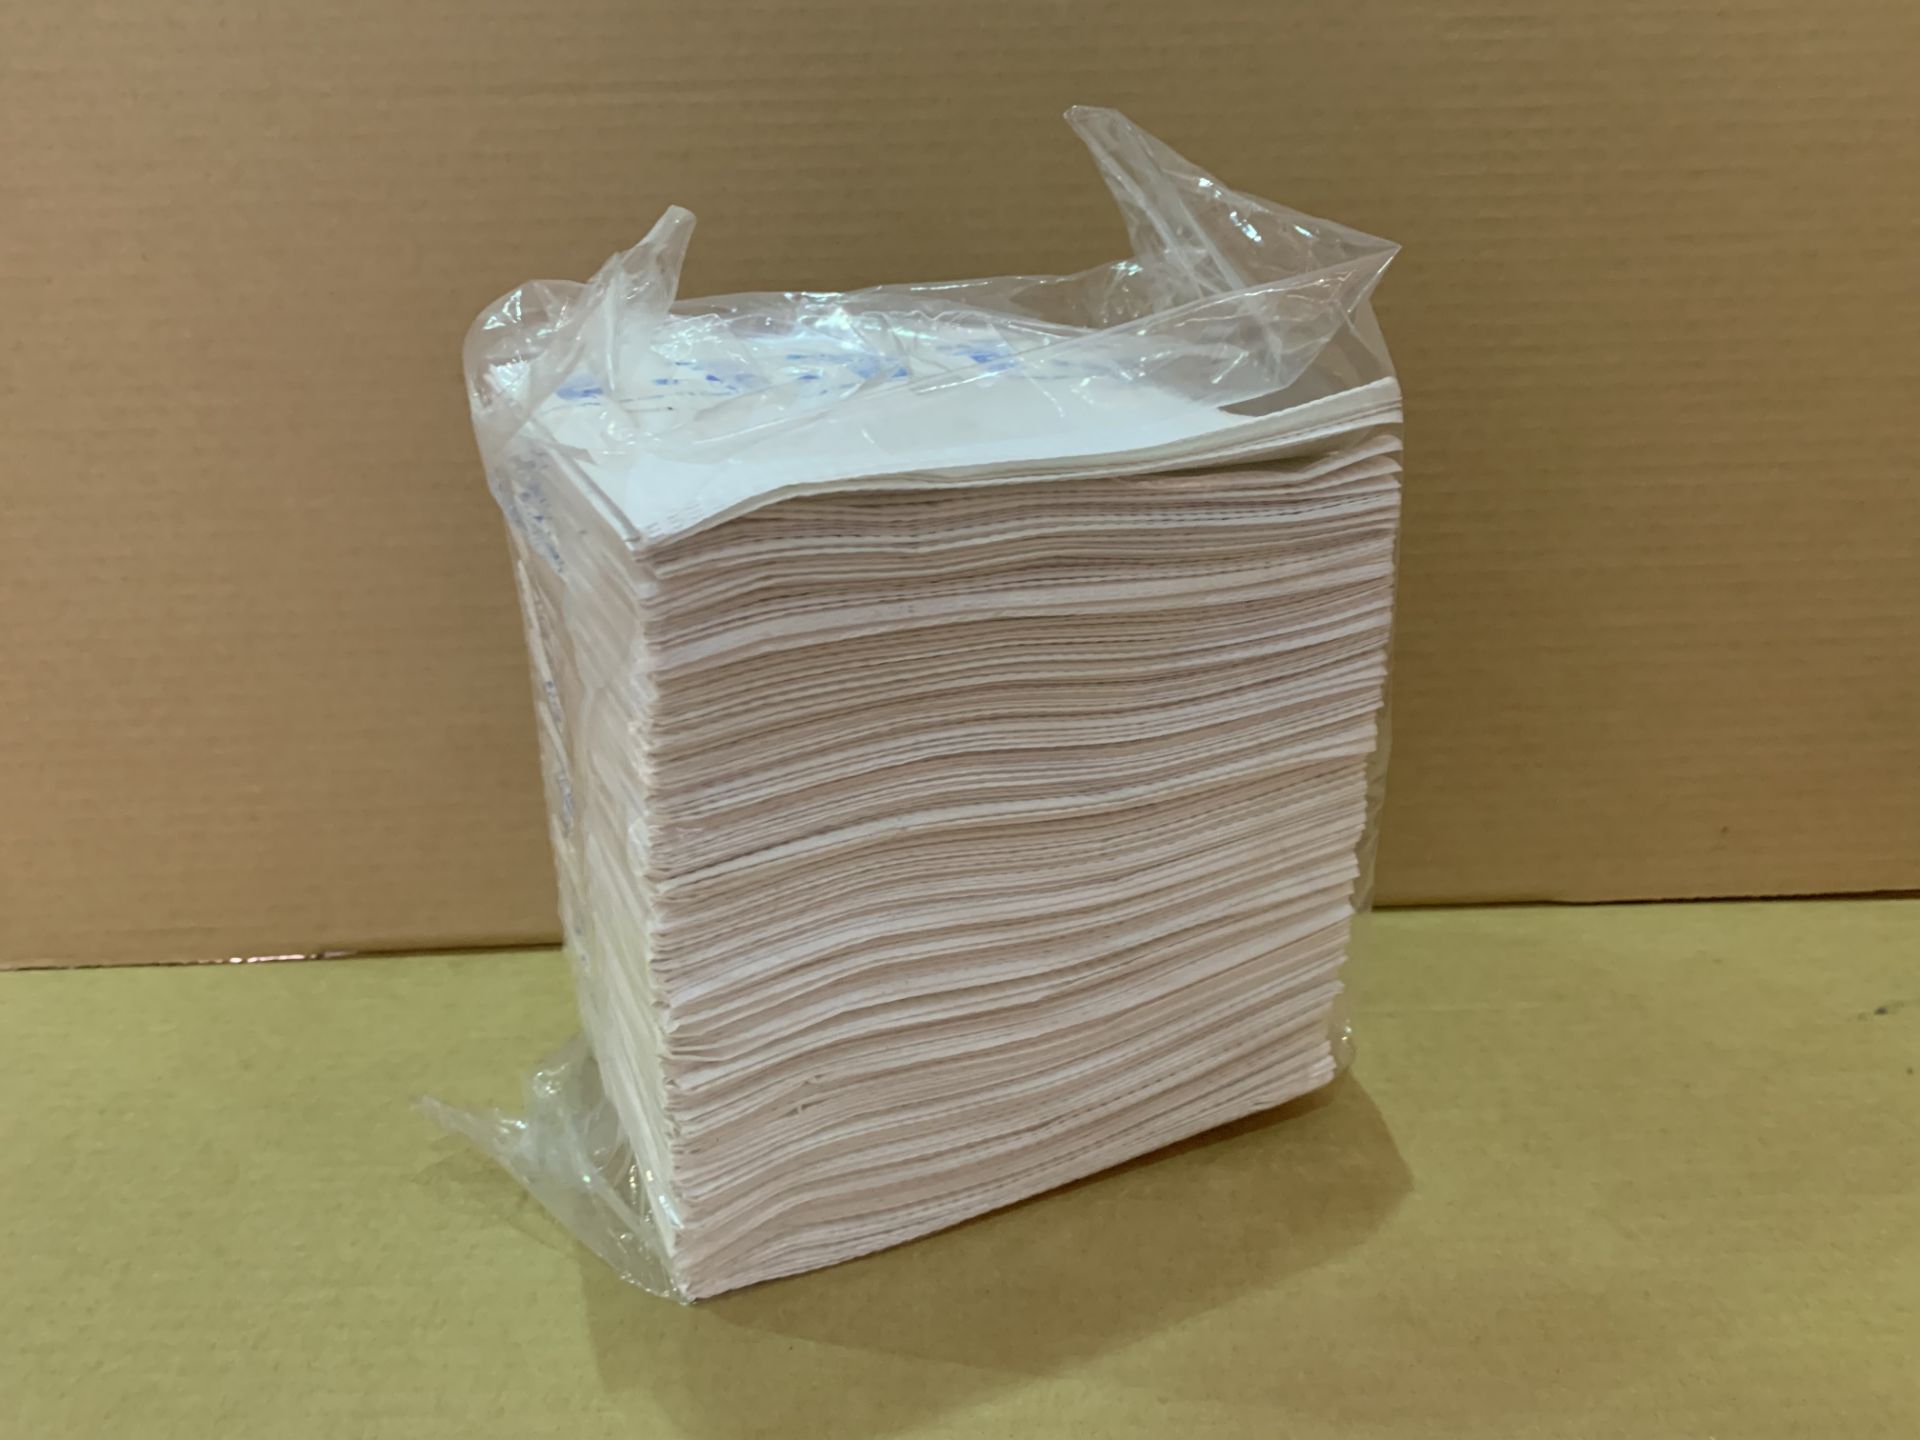 5400 BRAND NEW ADULT NAPKIN SPILL PROTECTORS IN 9 BOXES